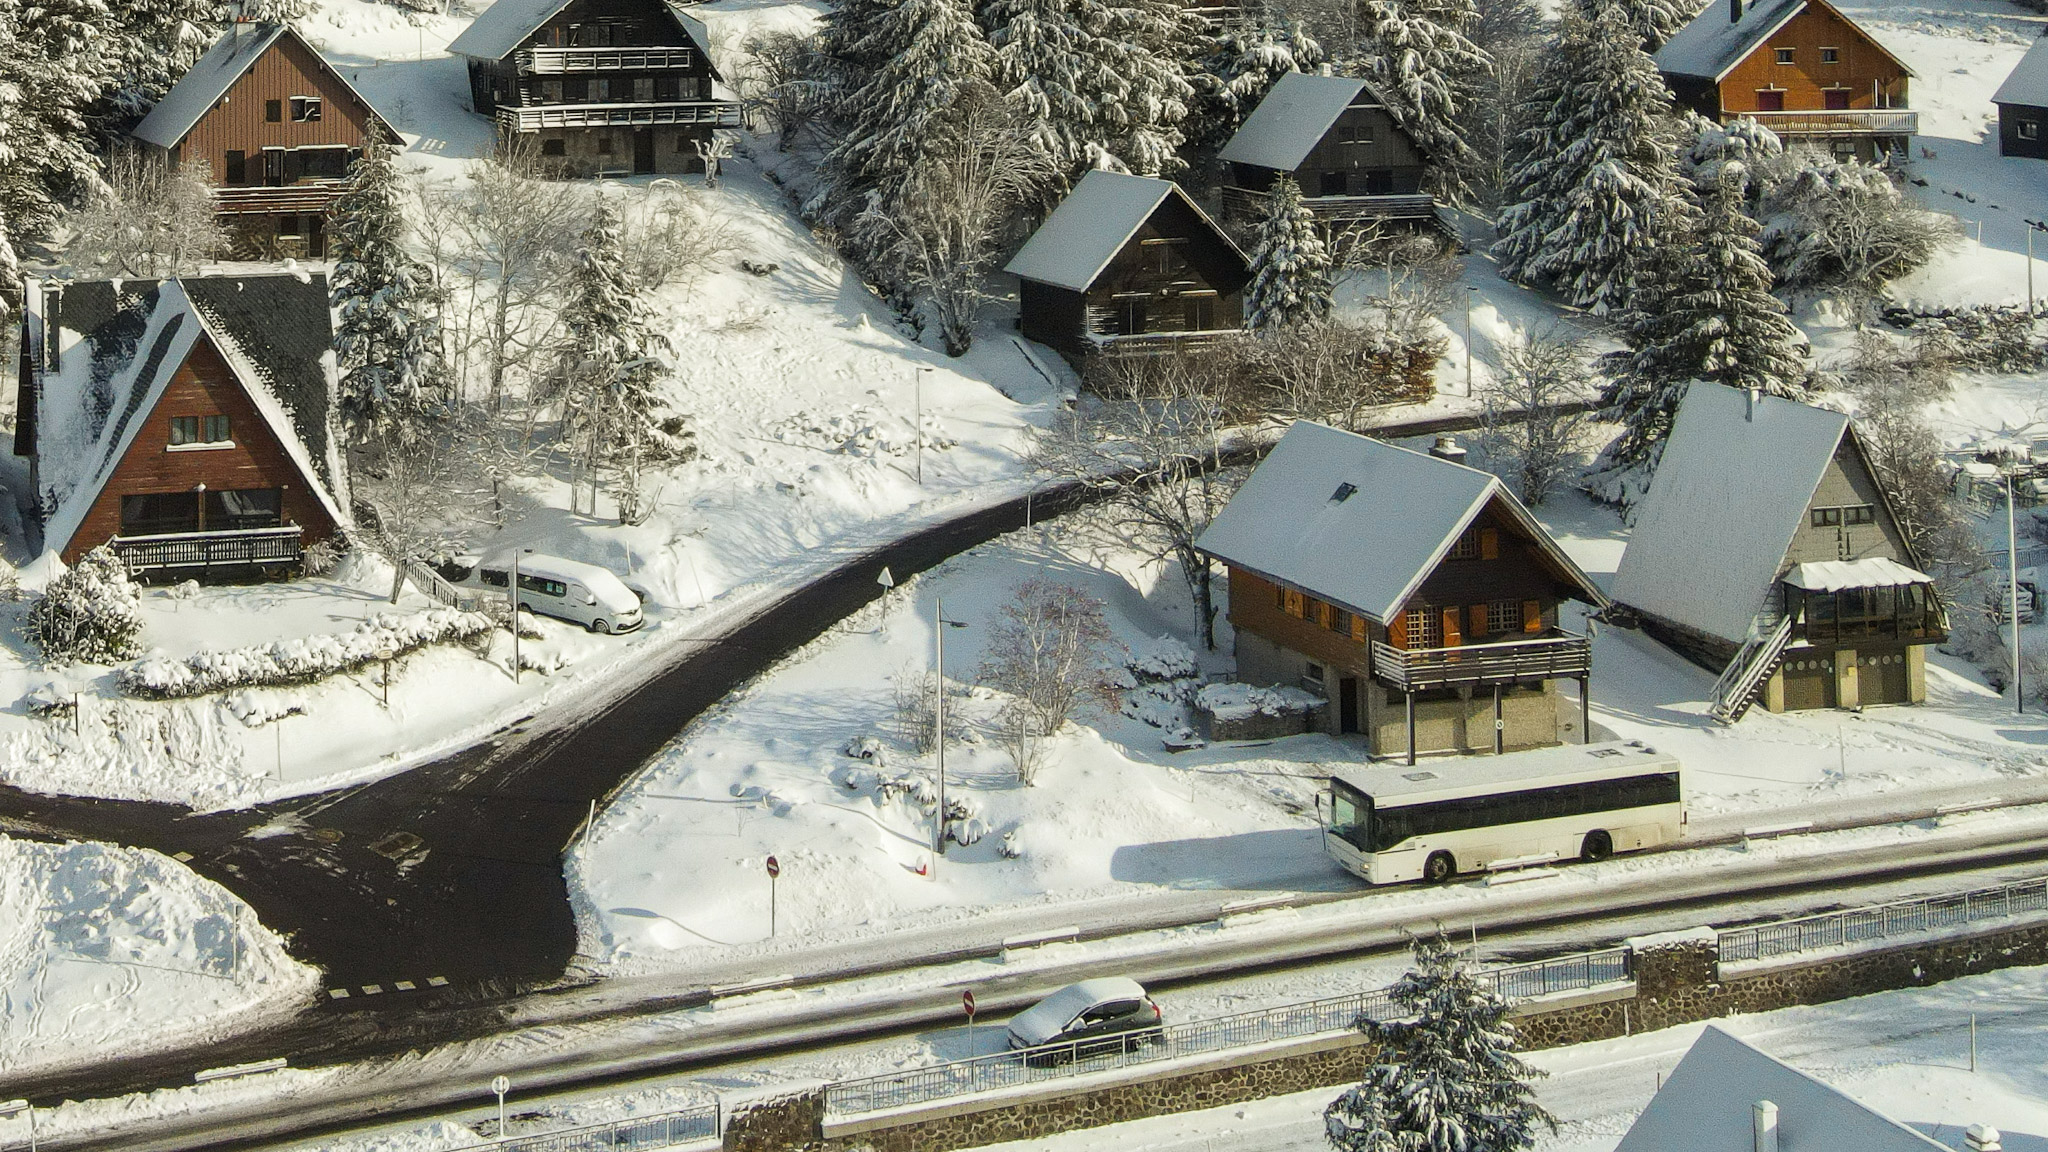 Super Besse seen from the sky, the resort shuttle under the snow